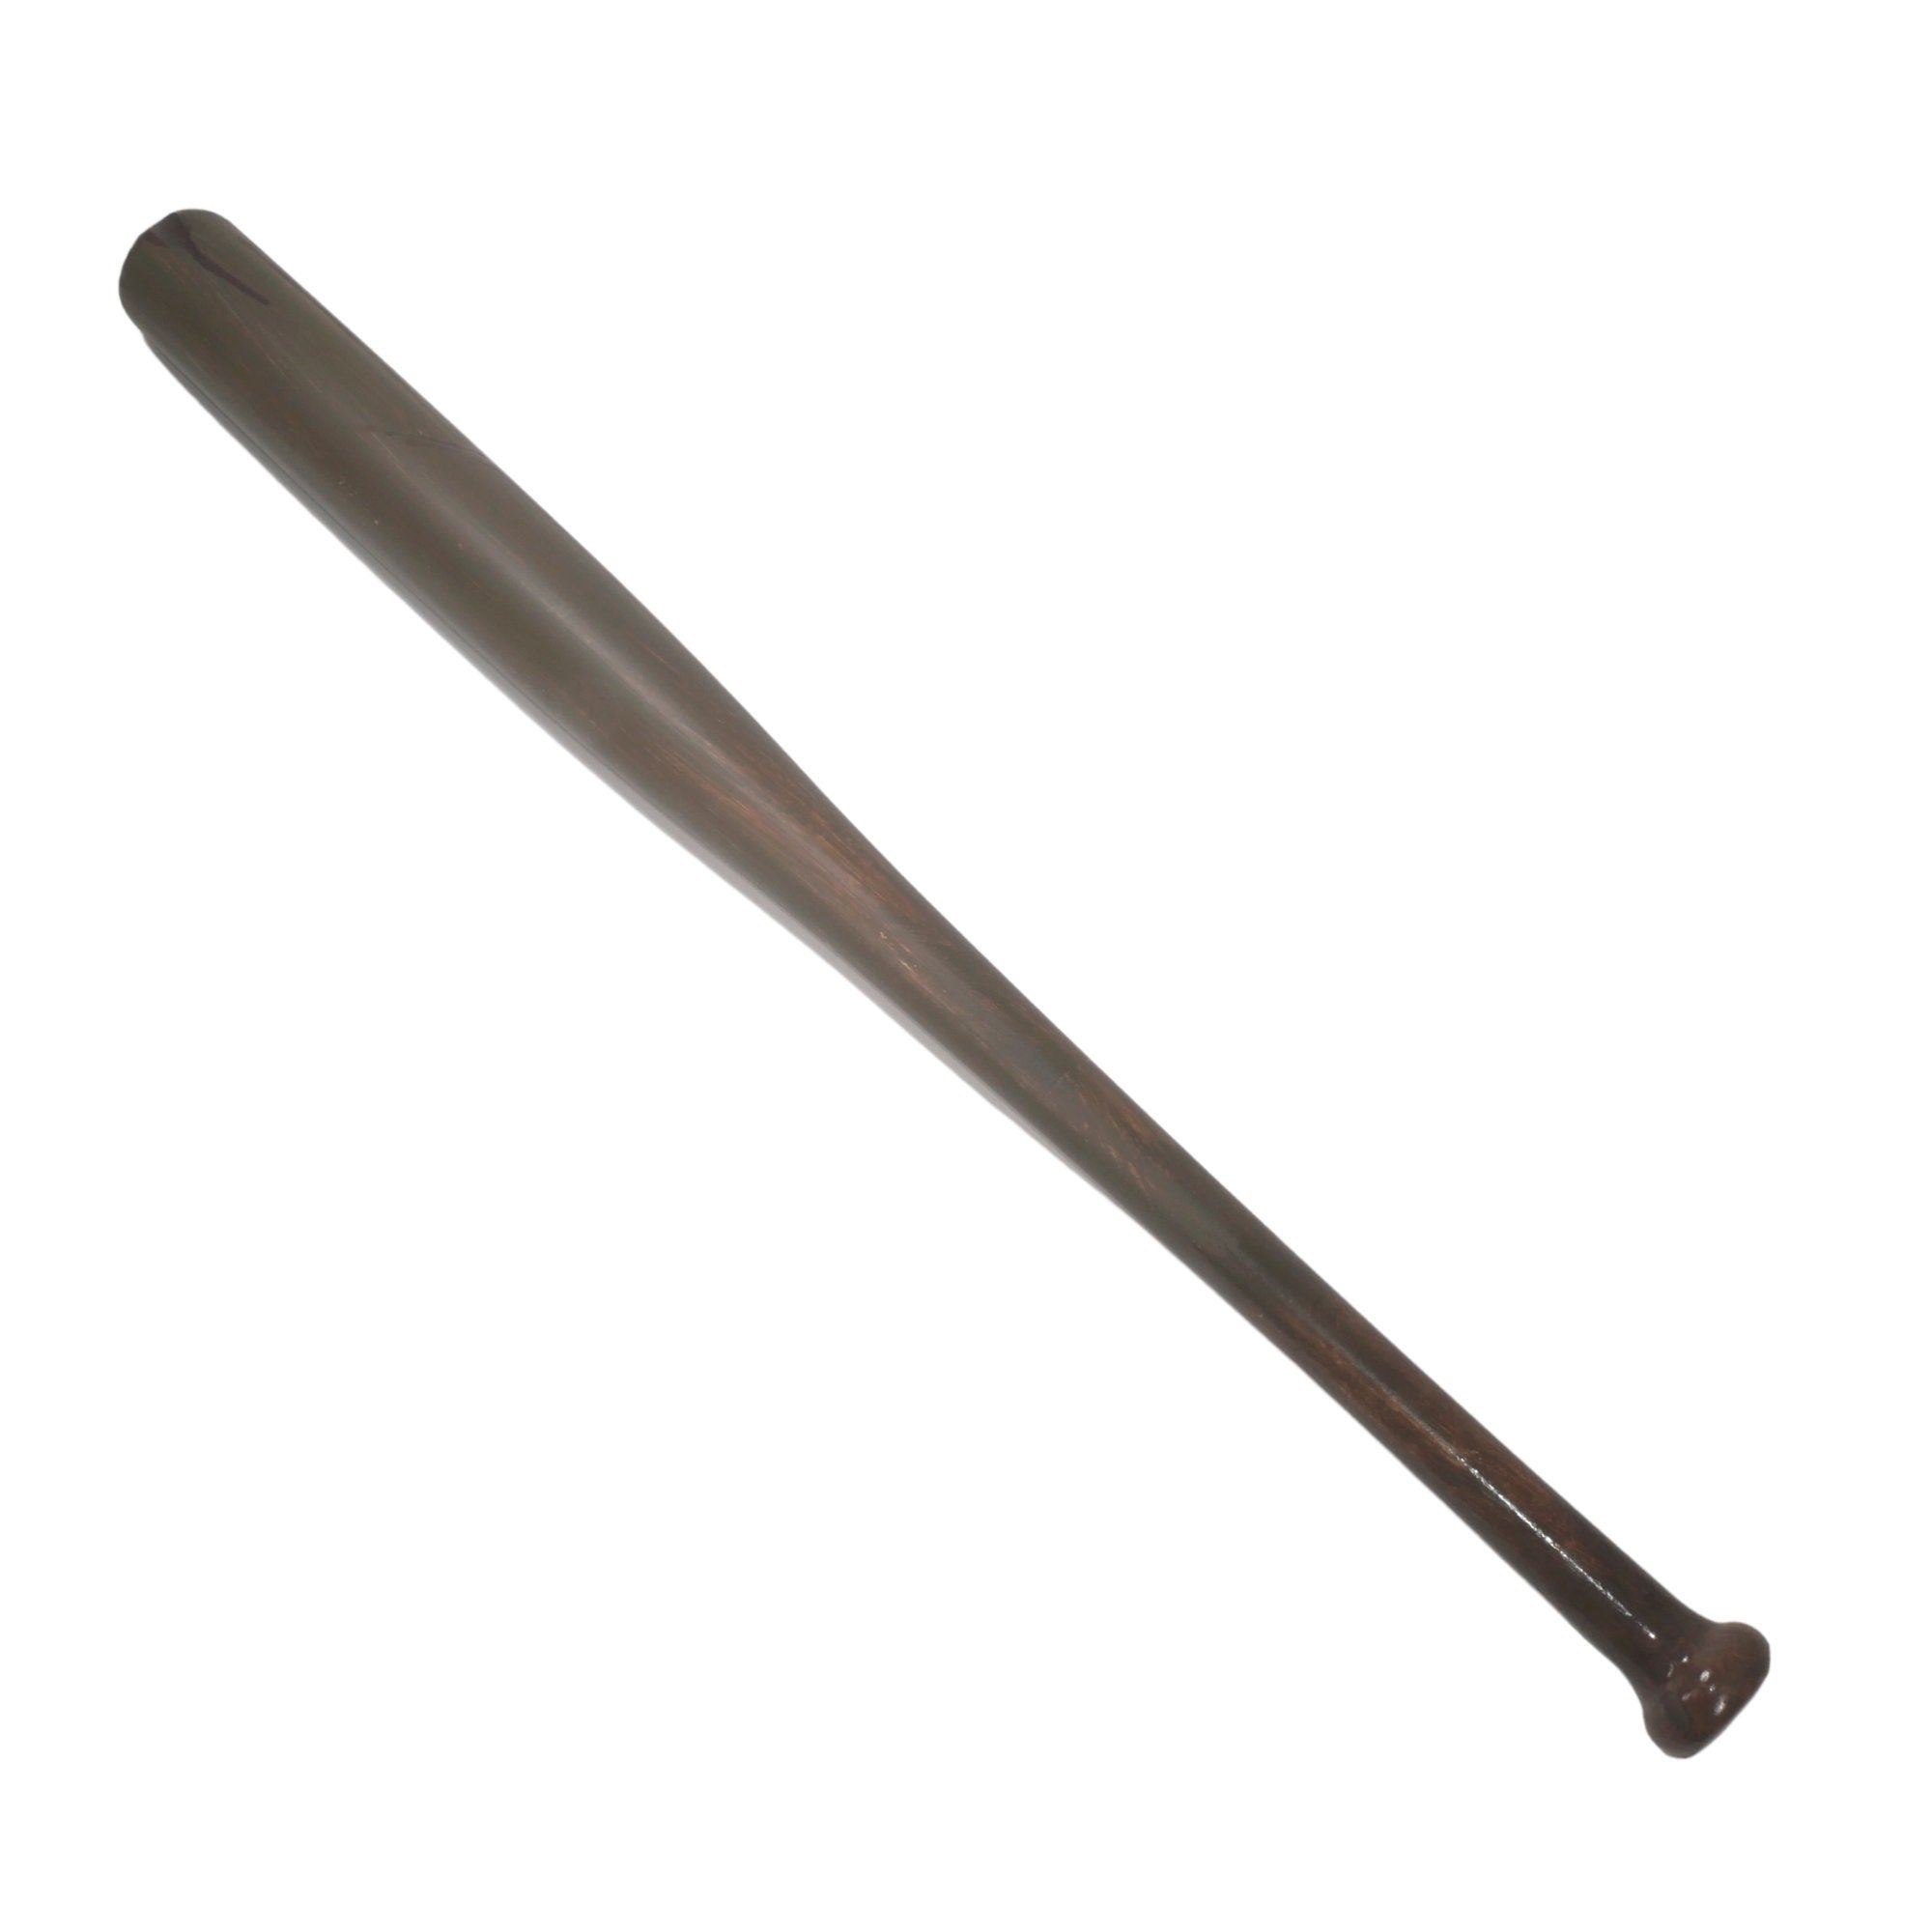 29 Foam Wooden Stick With Nails